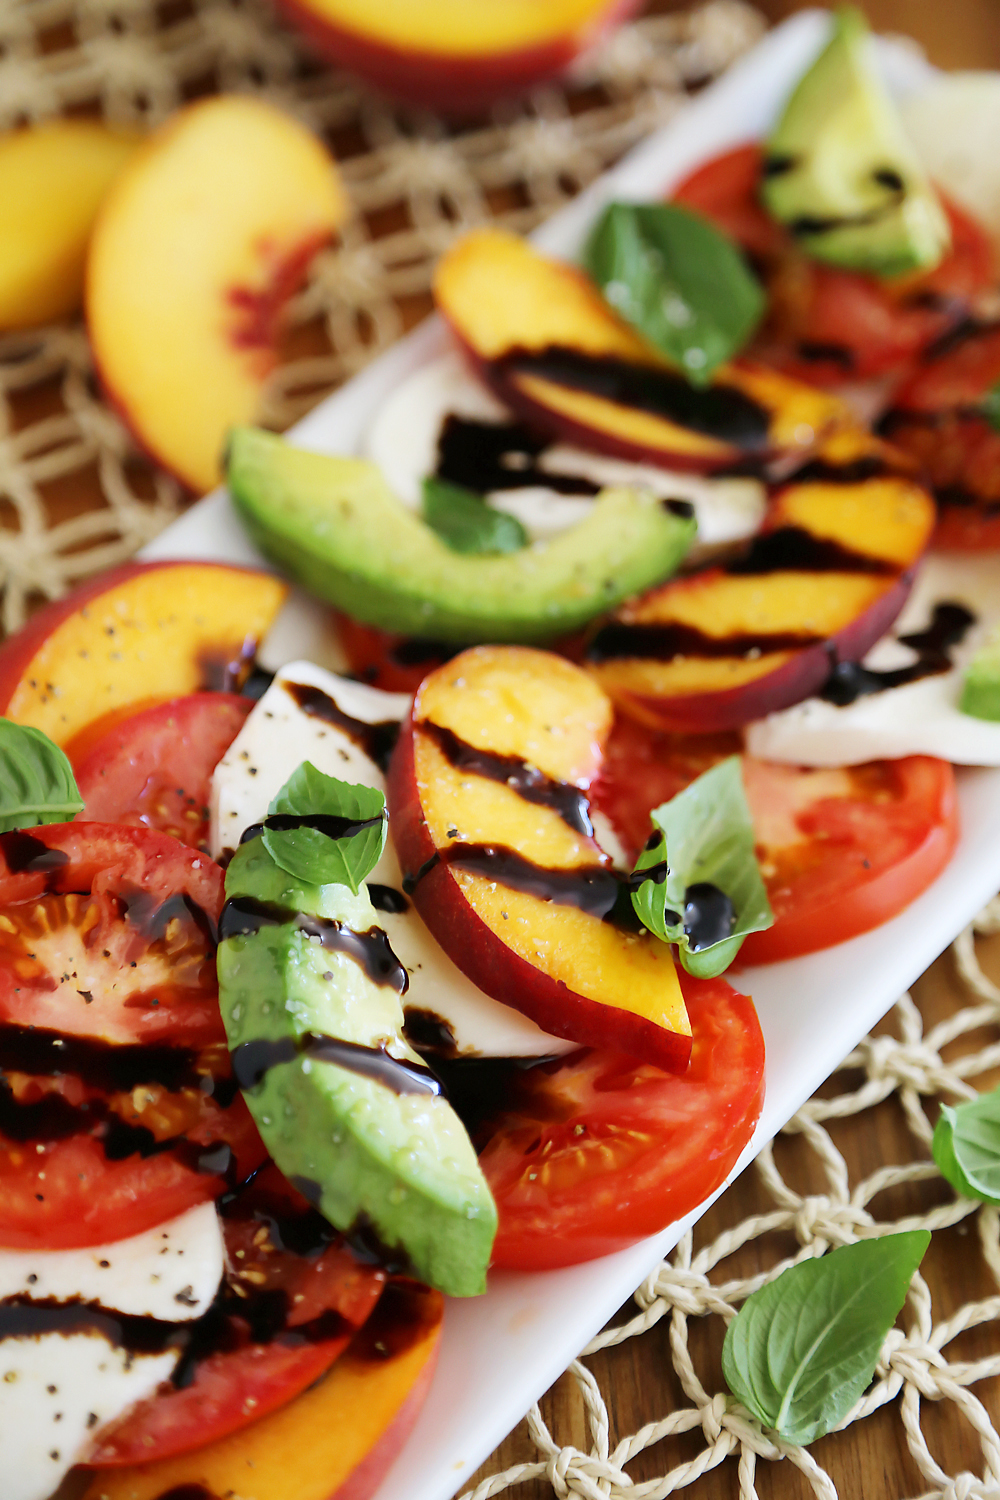 Peach and Avocado Caprese Salad - Salty, sweet, tangy and fresh! So easy and delicious with crusty bread + salad. Thecomfortofcooking.com